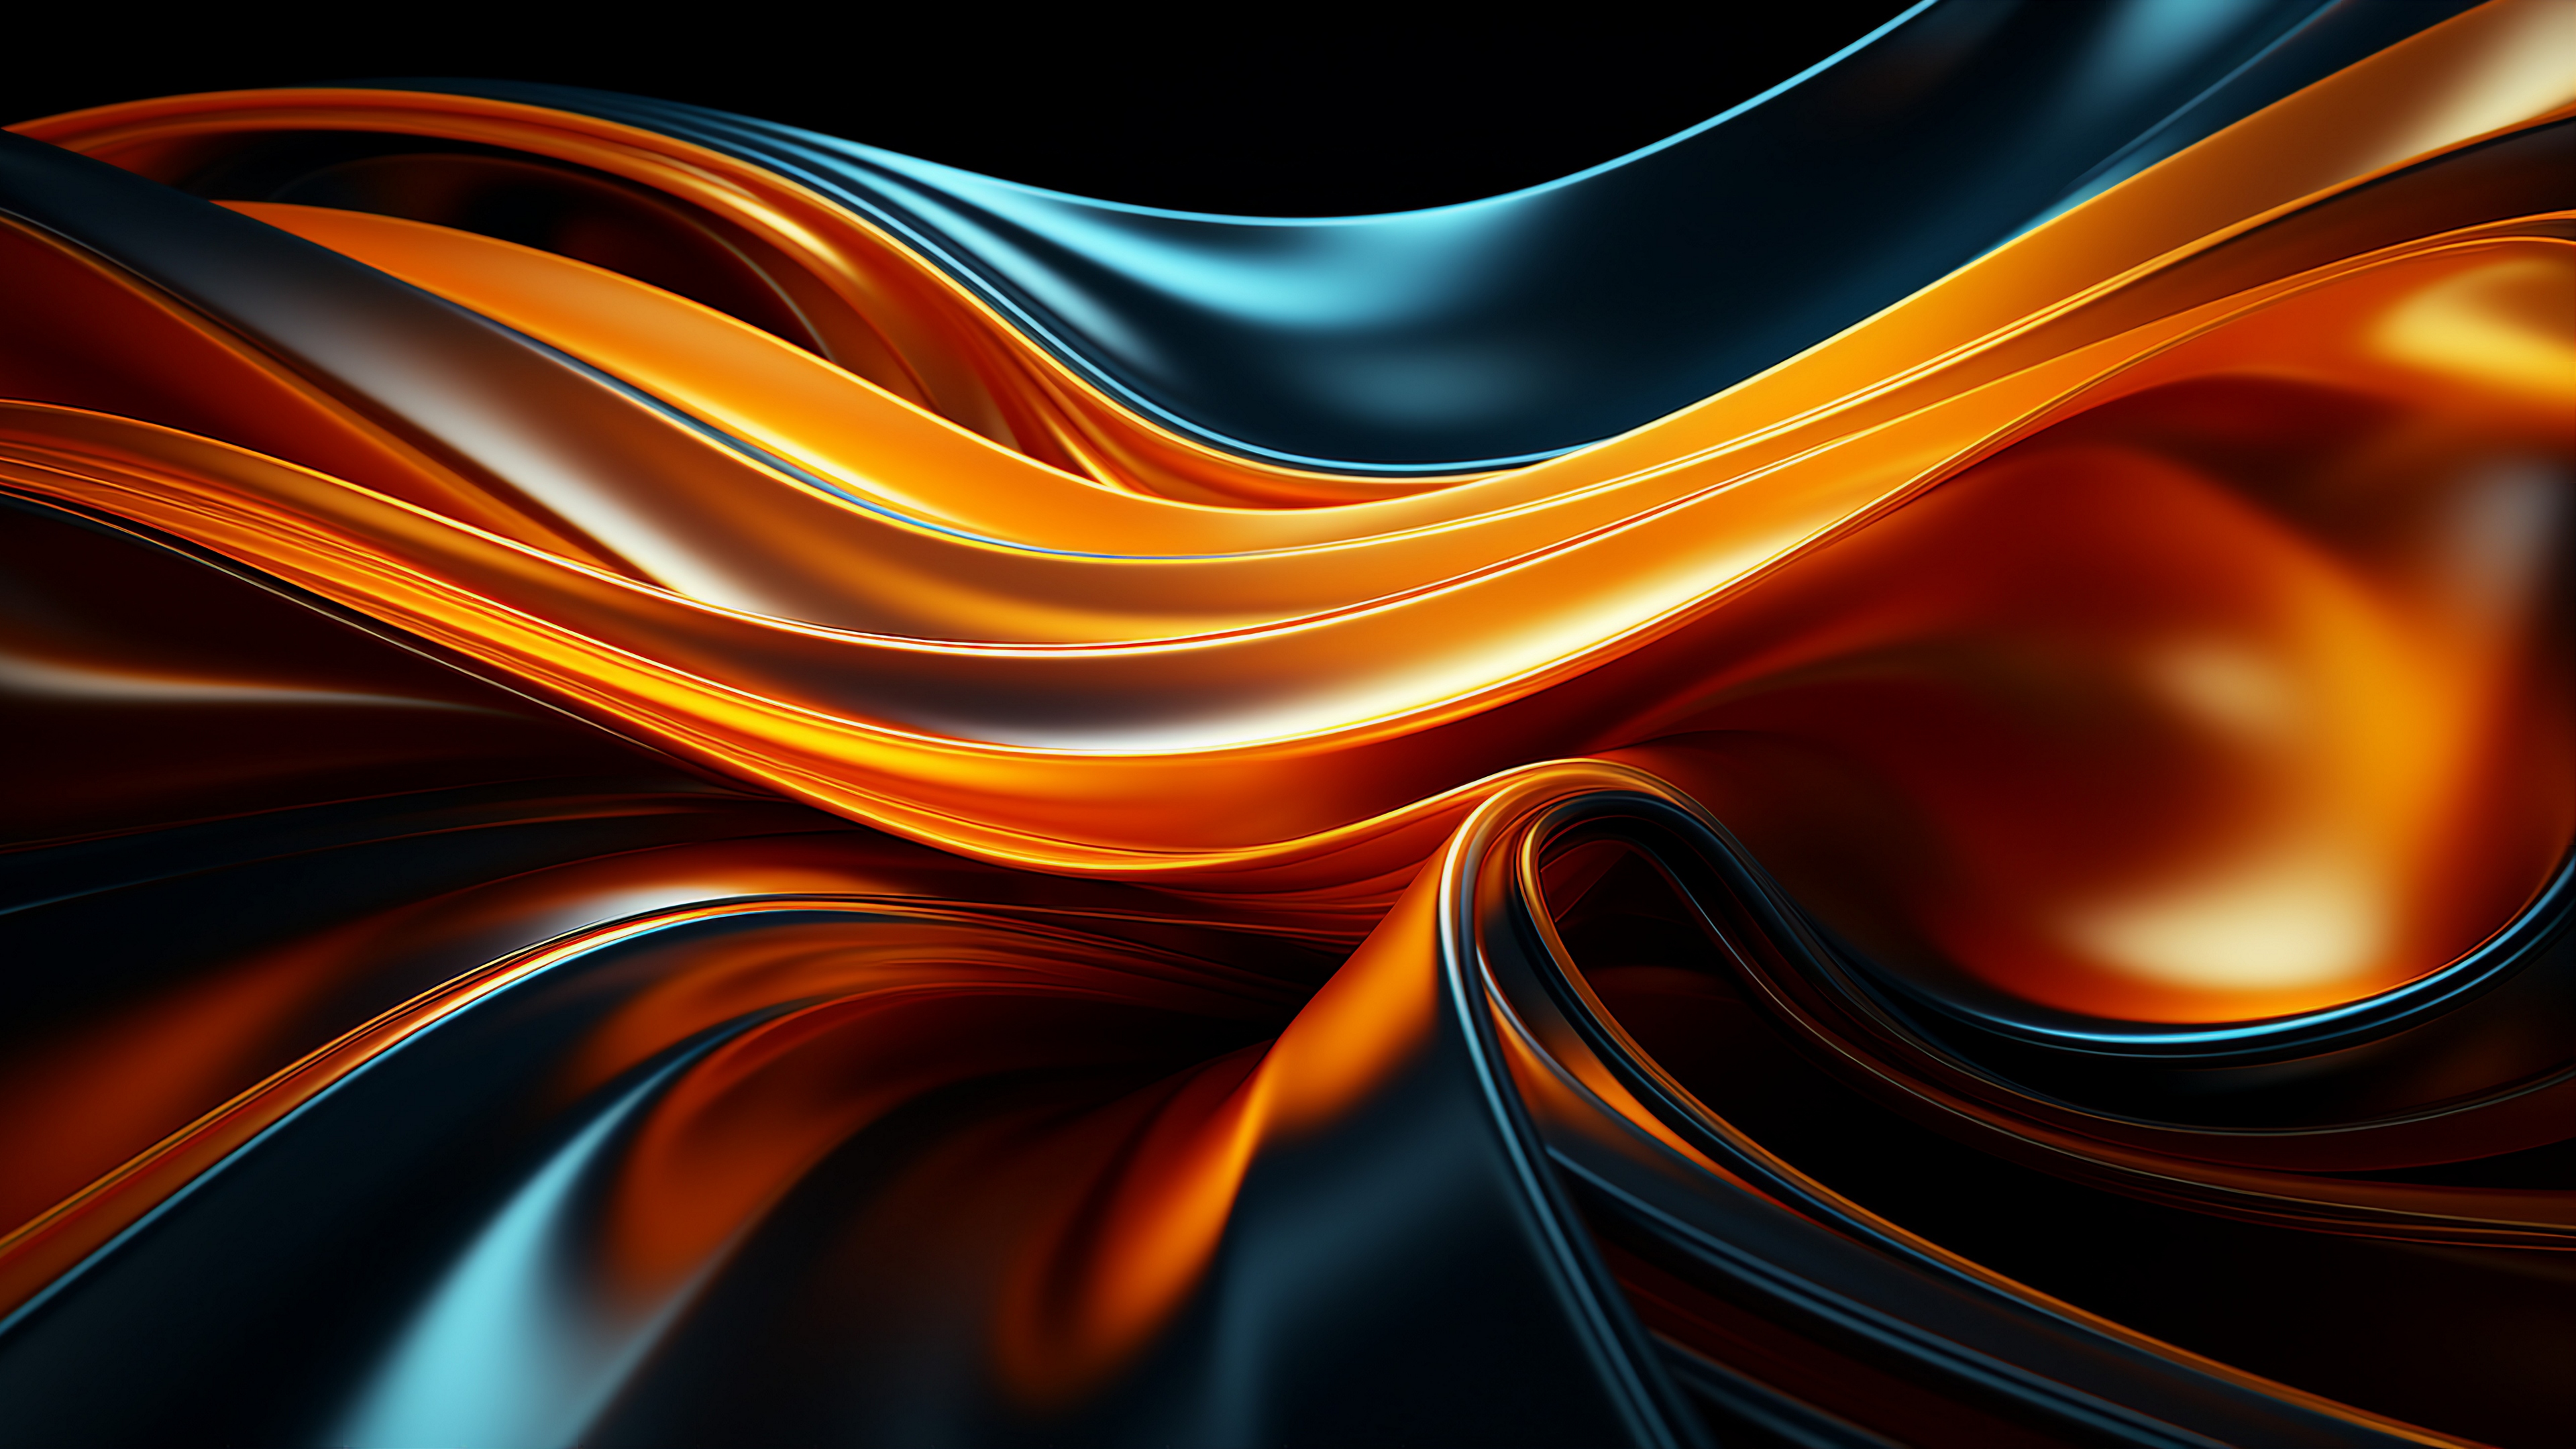 Abstract Waveforms Shapes Minimalism Simple Background Digital Art 3840x2160